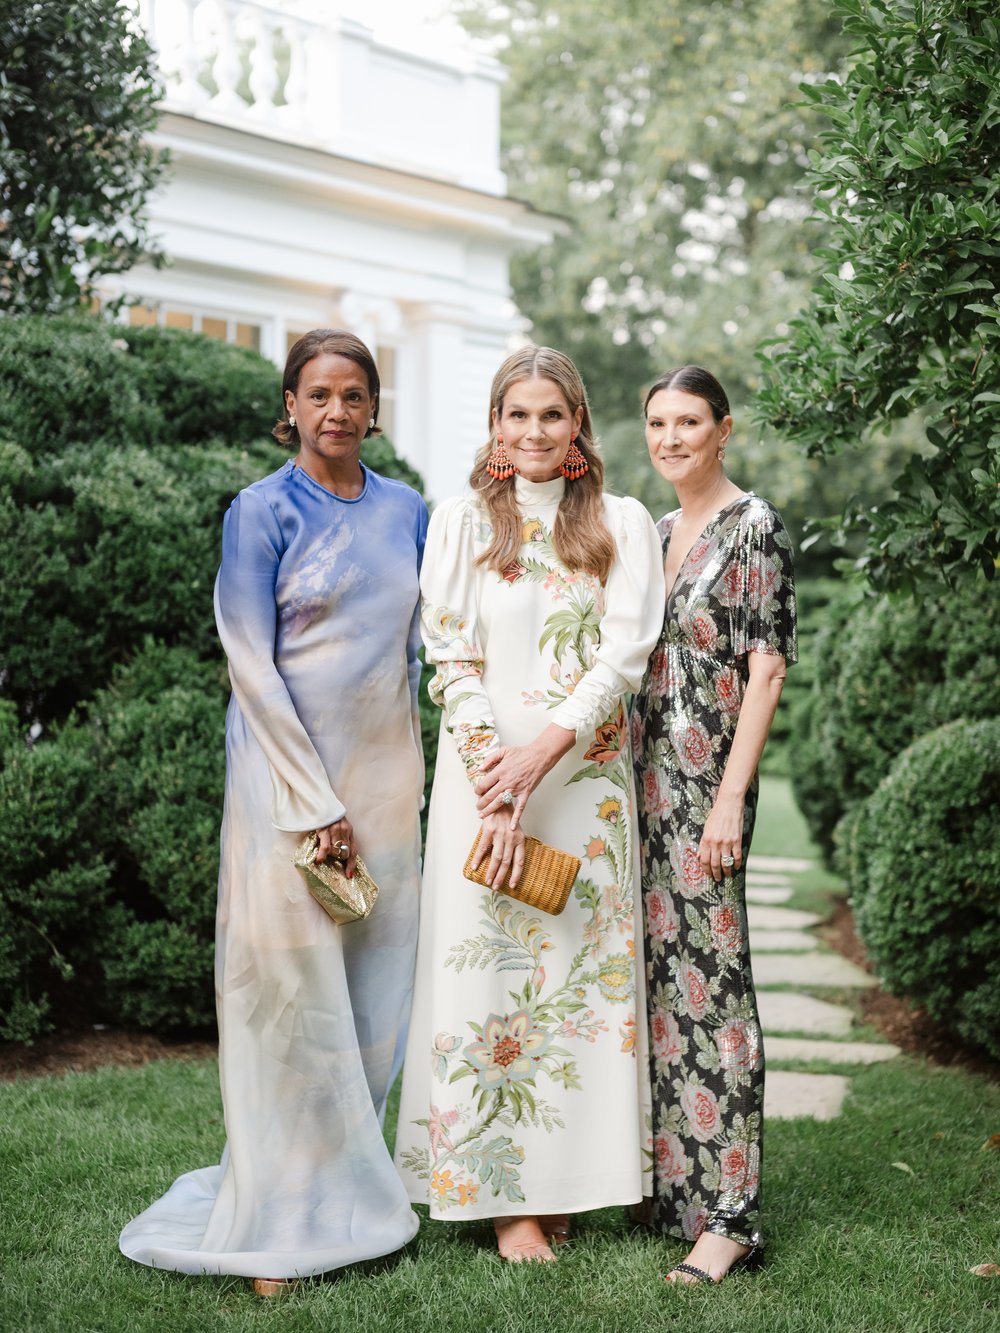    Photo: Ben Rosser/BFA.com     5/14    Mireya D'Anglo, Aerin Lauder, and Lizzie Tisch   attend An Intimate Dinner Hosted by Aerin Lauder and Amy Astley on Thursday, July 13, 2023.   